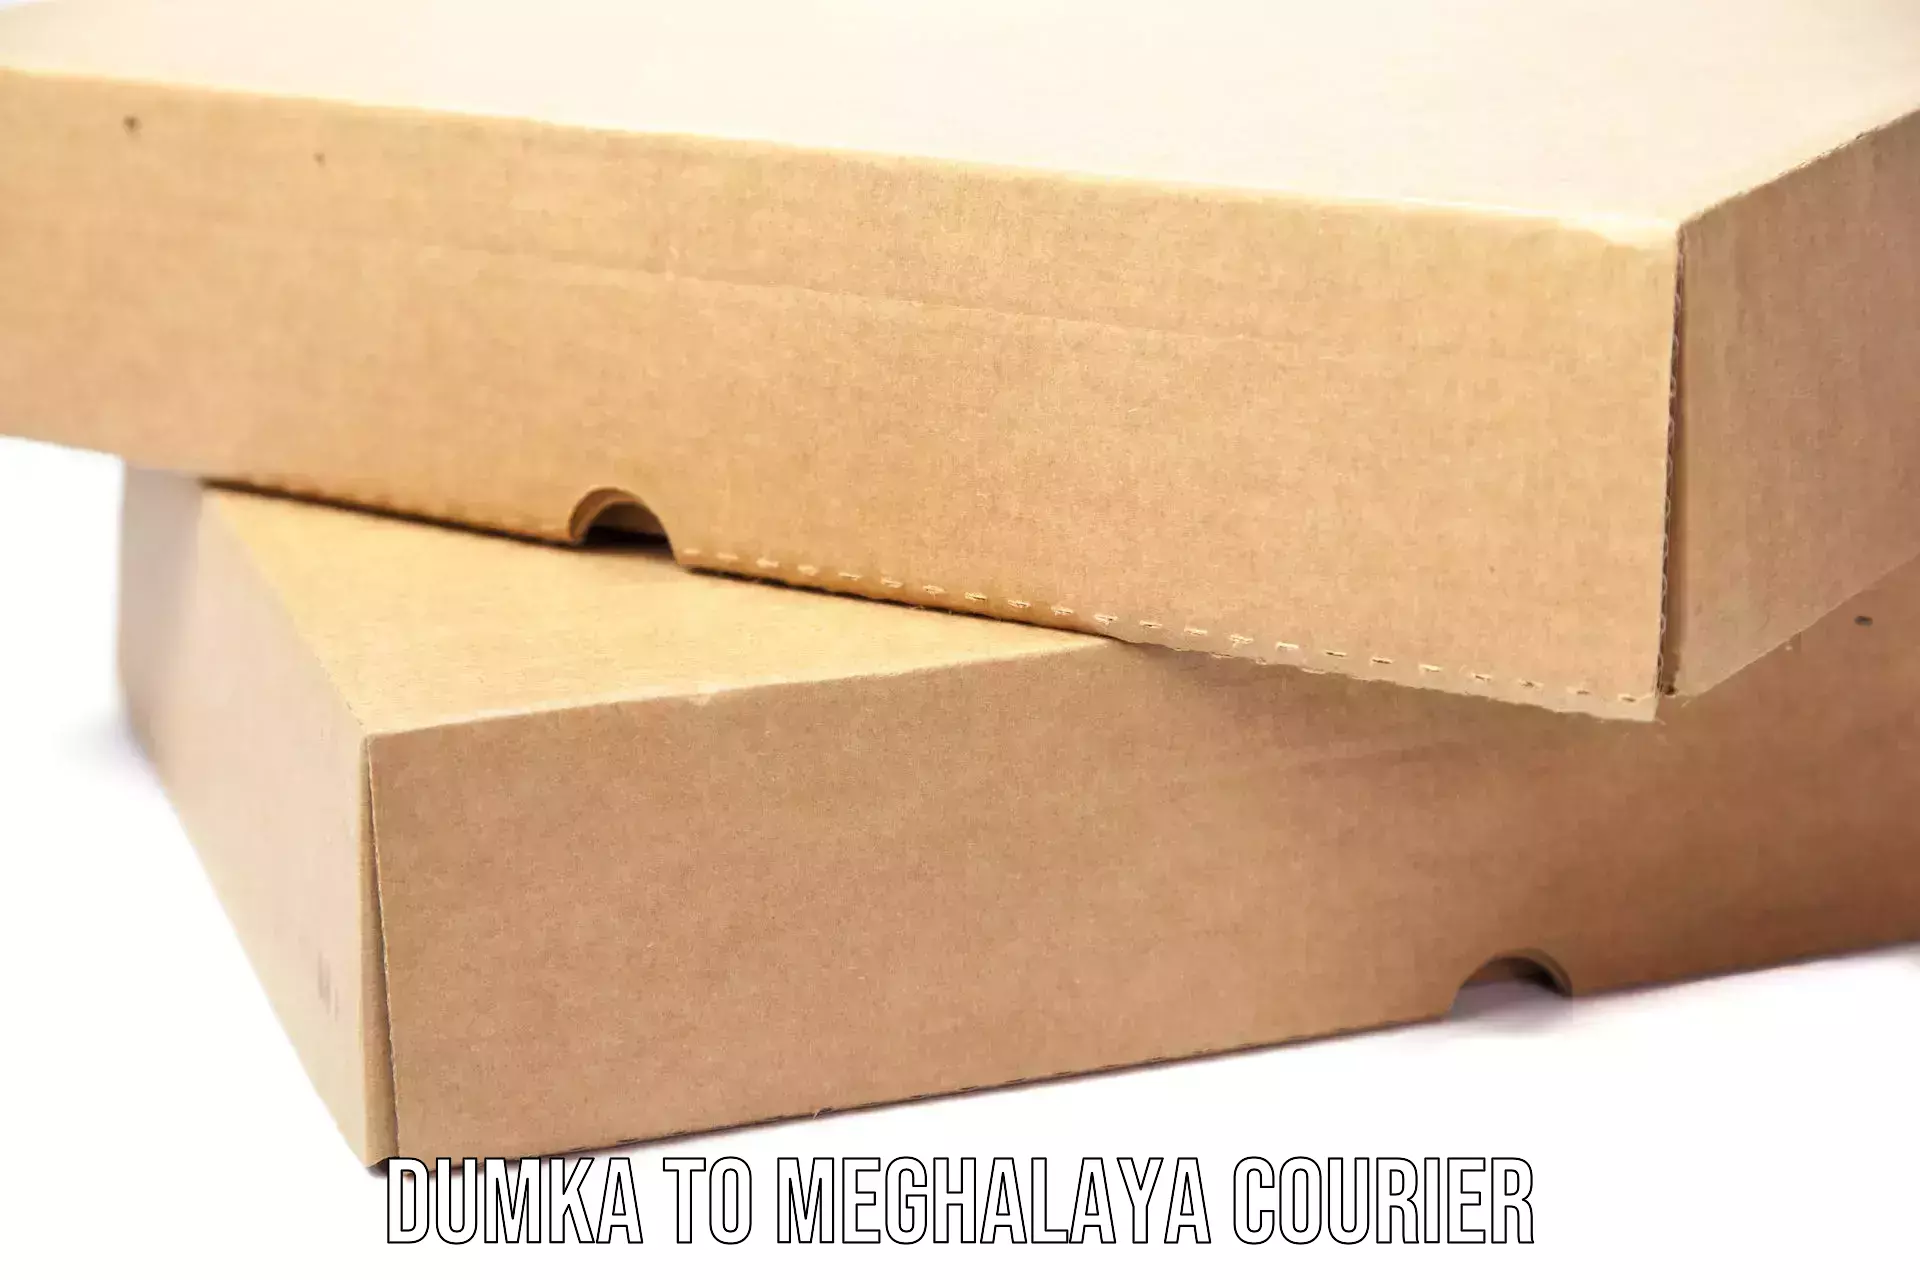 Online shipping calculator Dumka to Umsaw